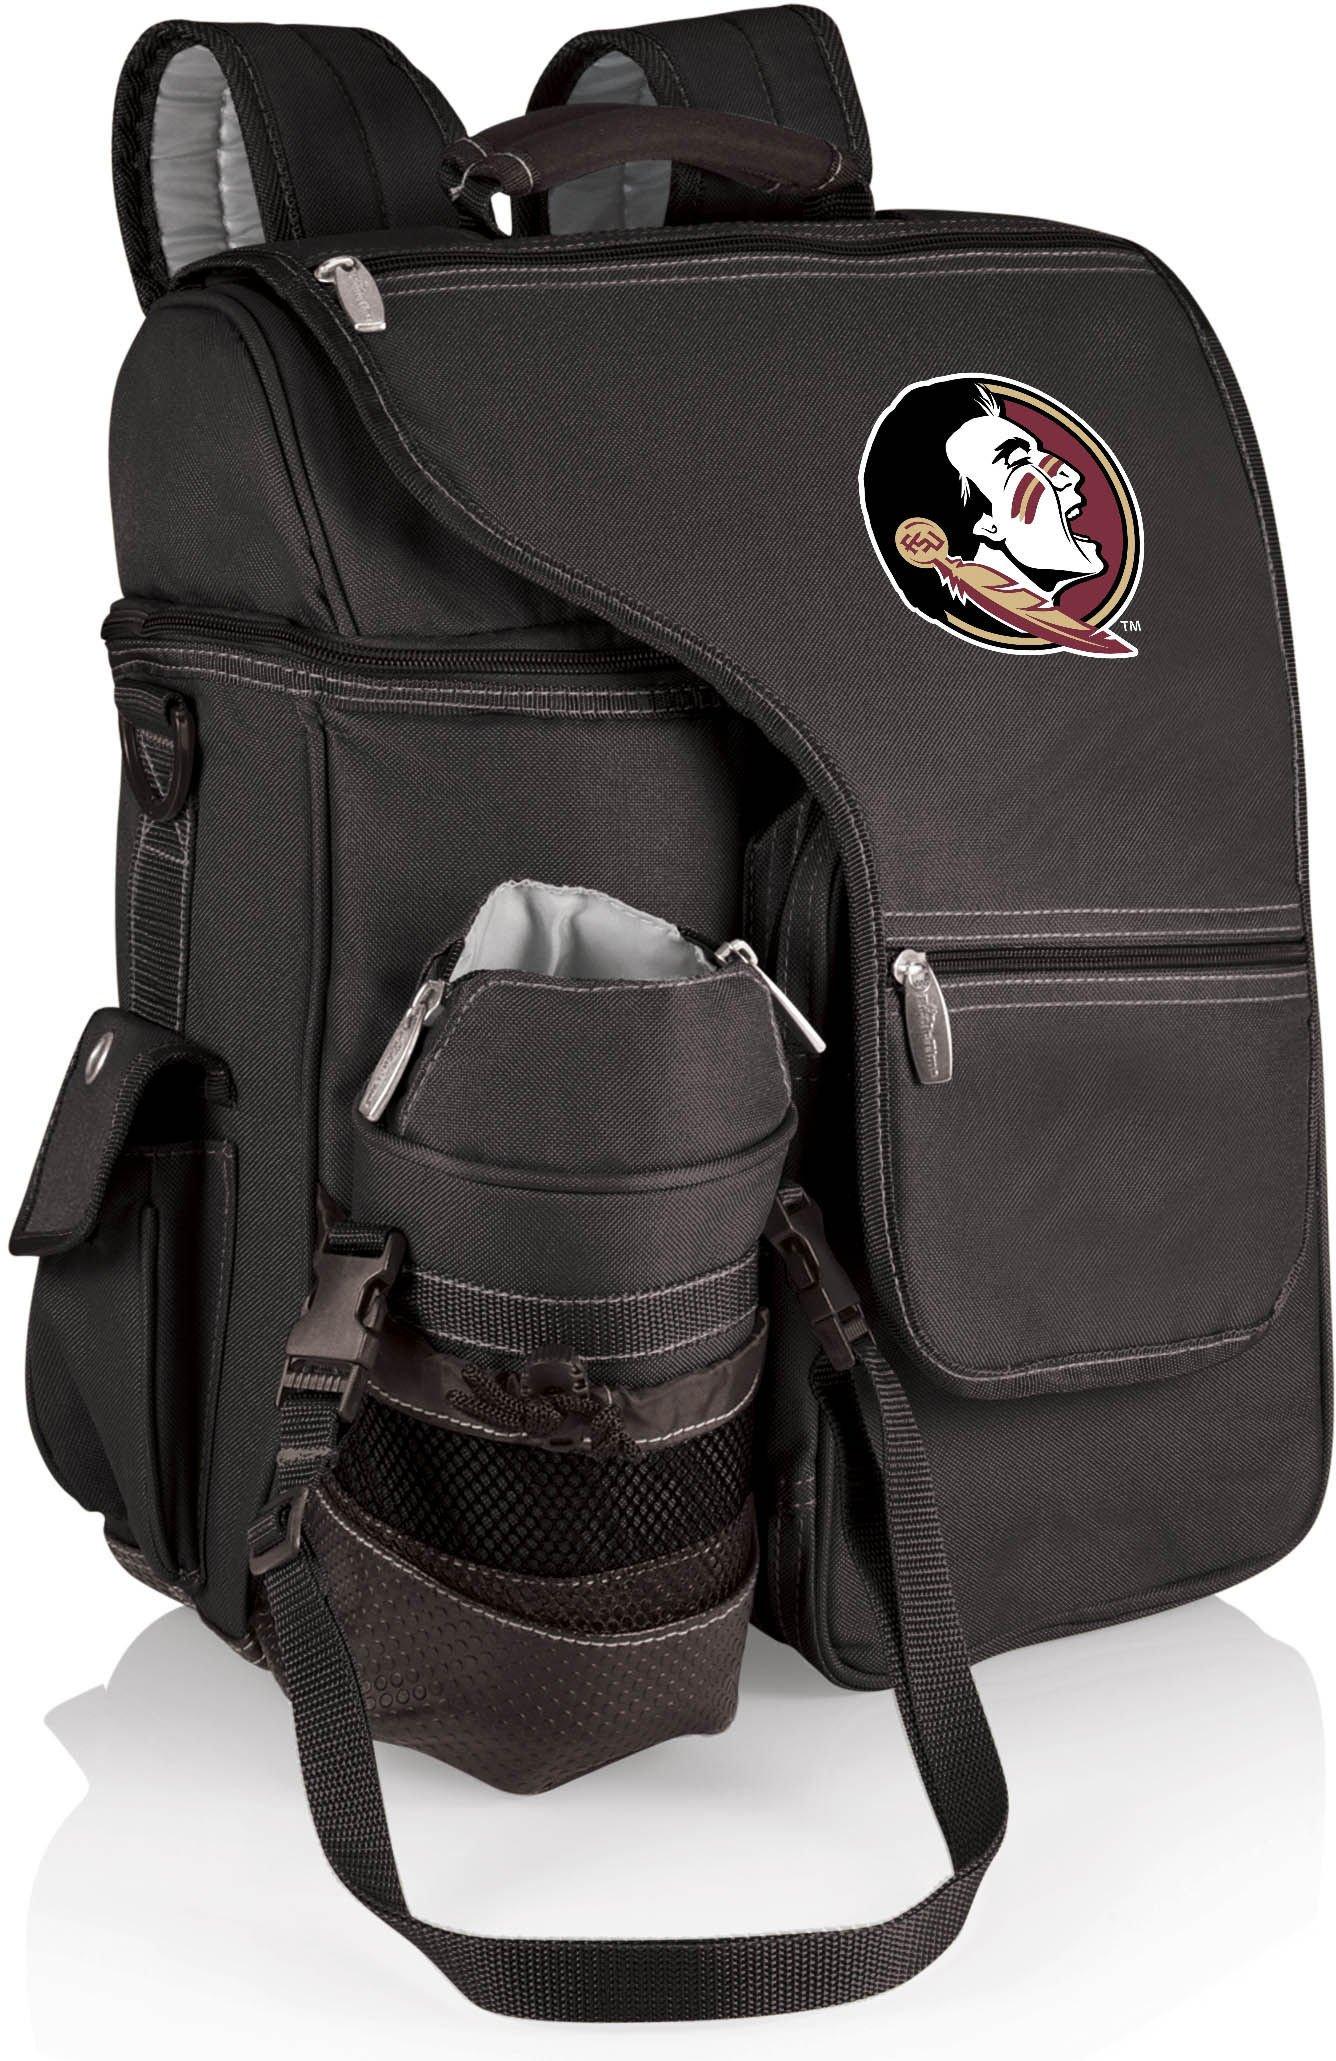 Florida State Turismo Backpack by Picnic Time